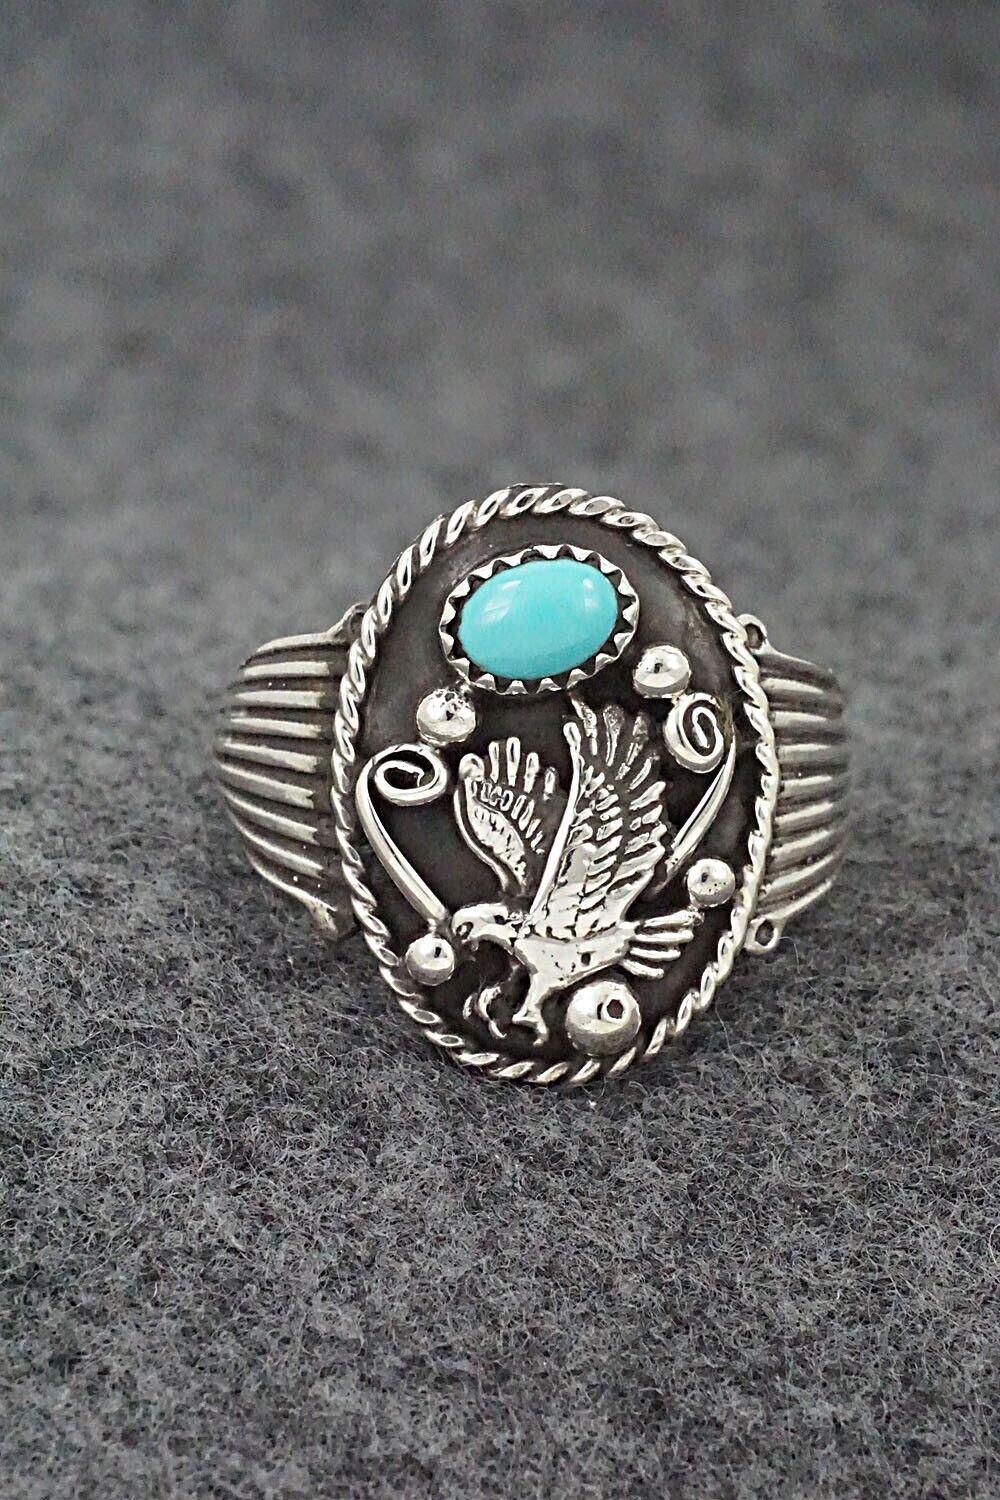 Turquoise & Sterling Silver Ring - Jeannette Saunders - Size 13